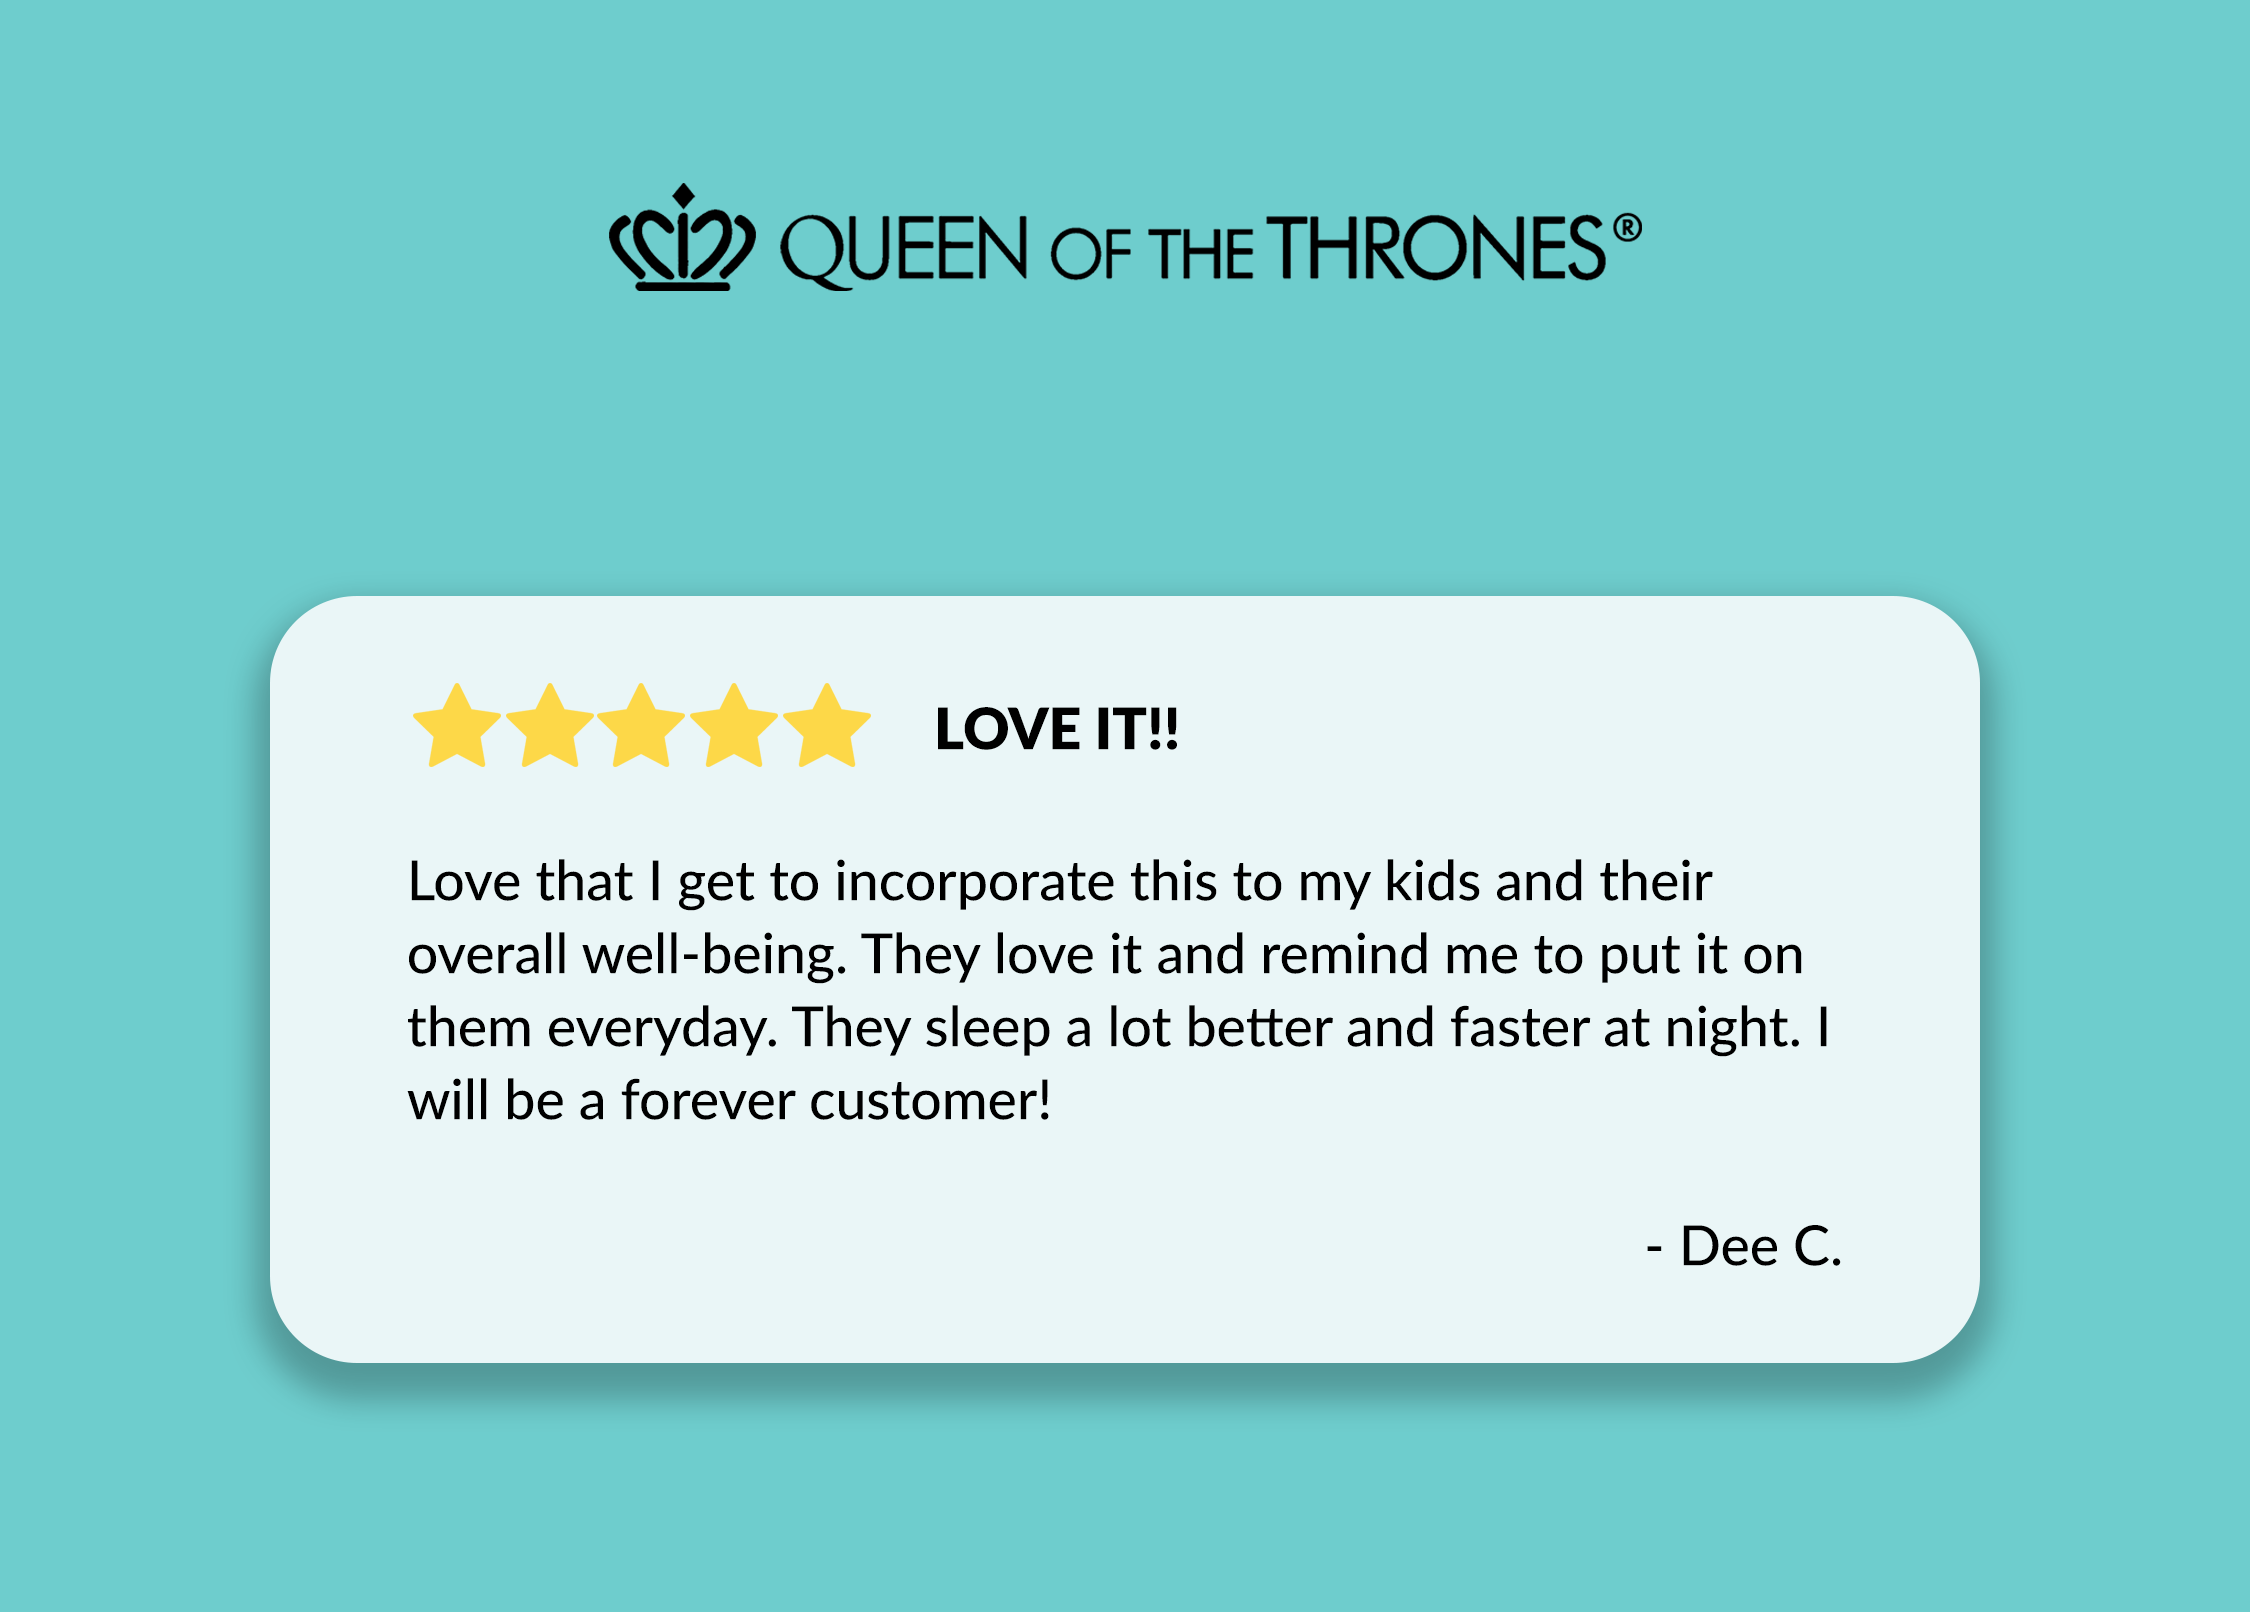 Queen of the Thrones customer testimony about Castor Oil Packs for Kids